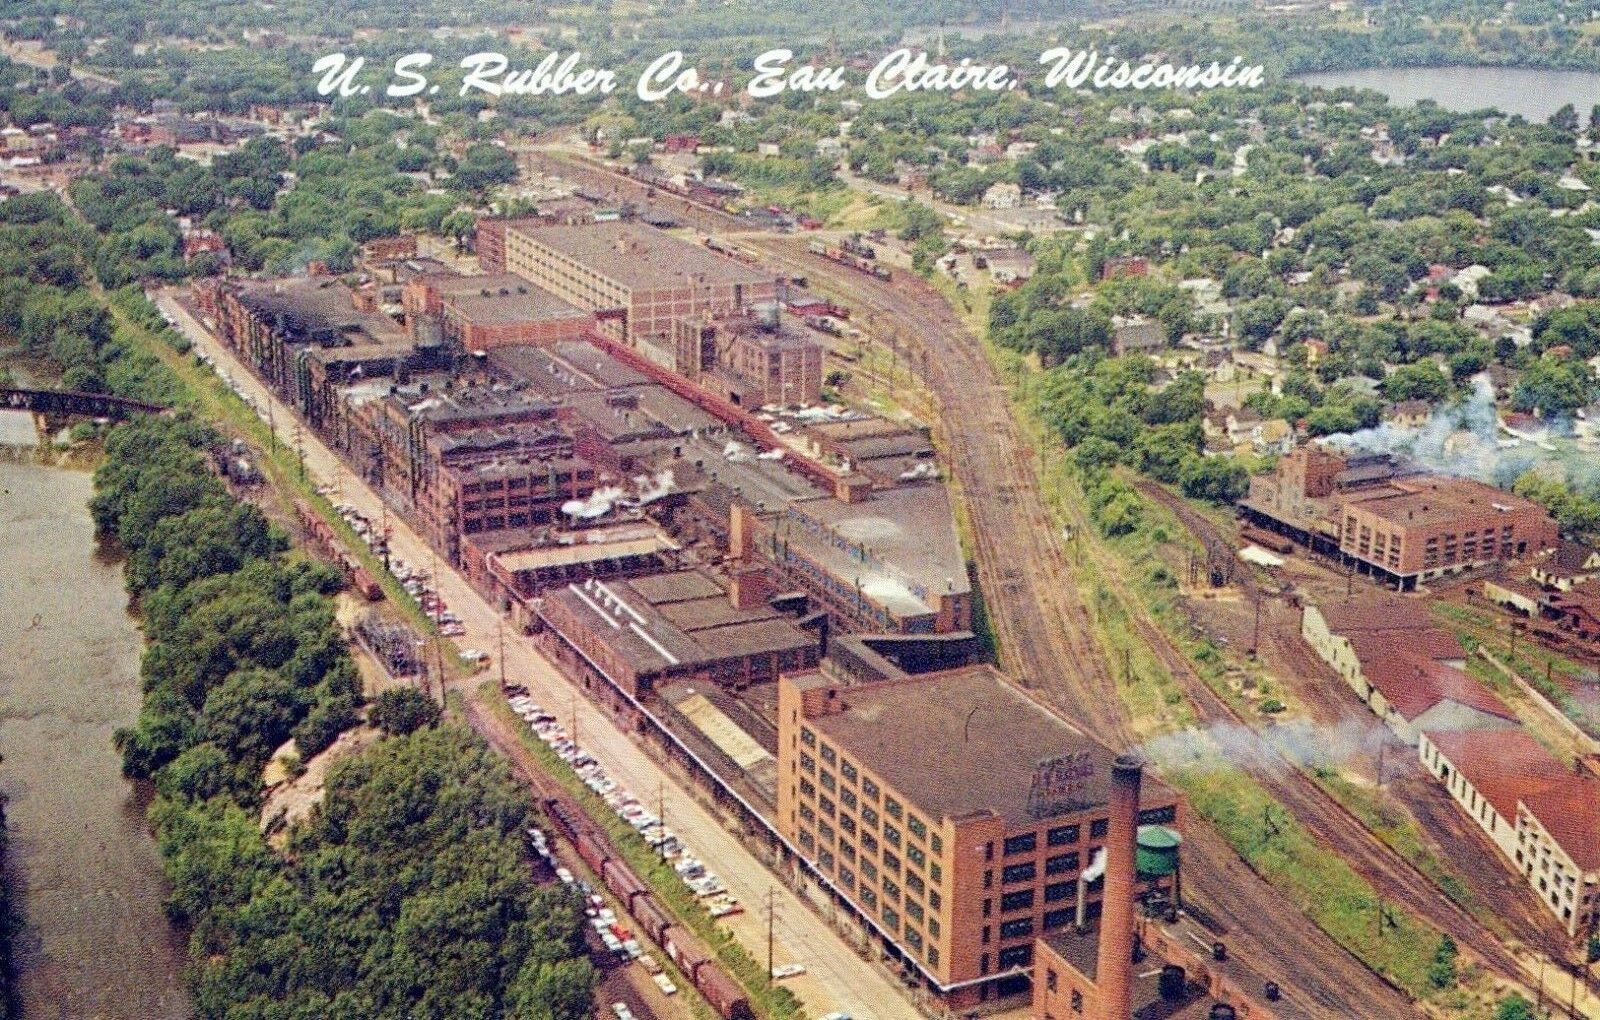 US Rubber Company Eau Claire Wisconsin Aerial View Vintage Chrome Post Card